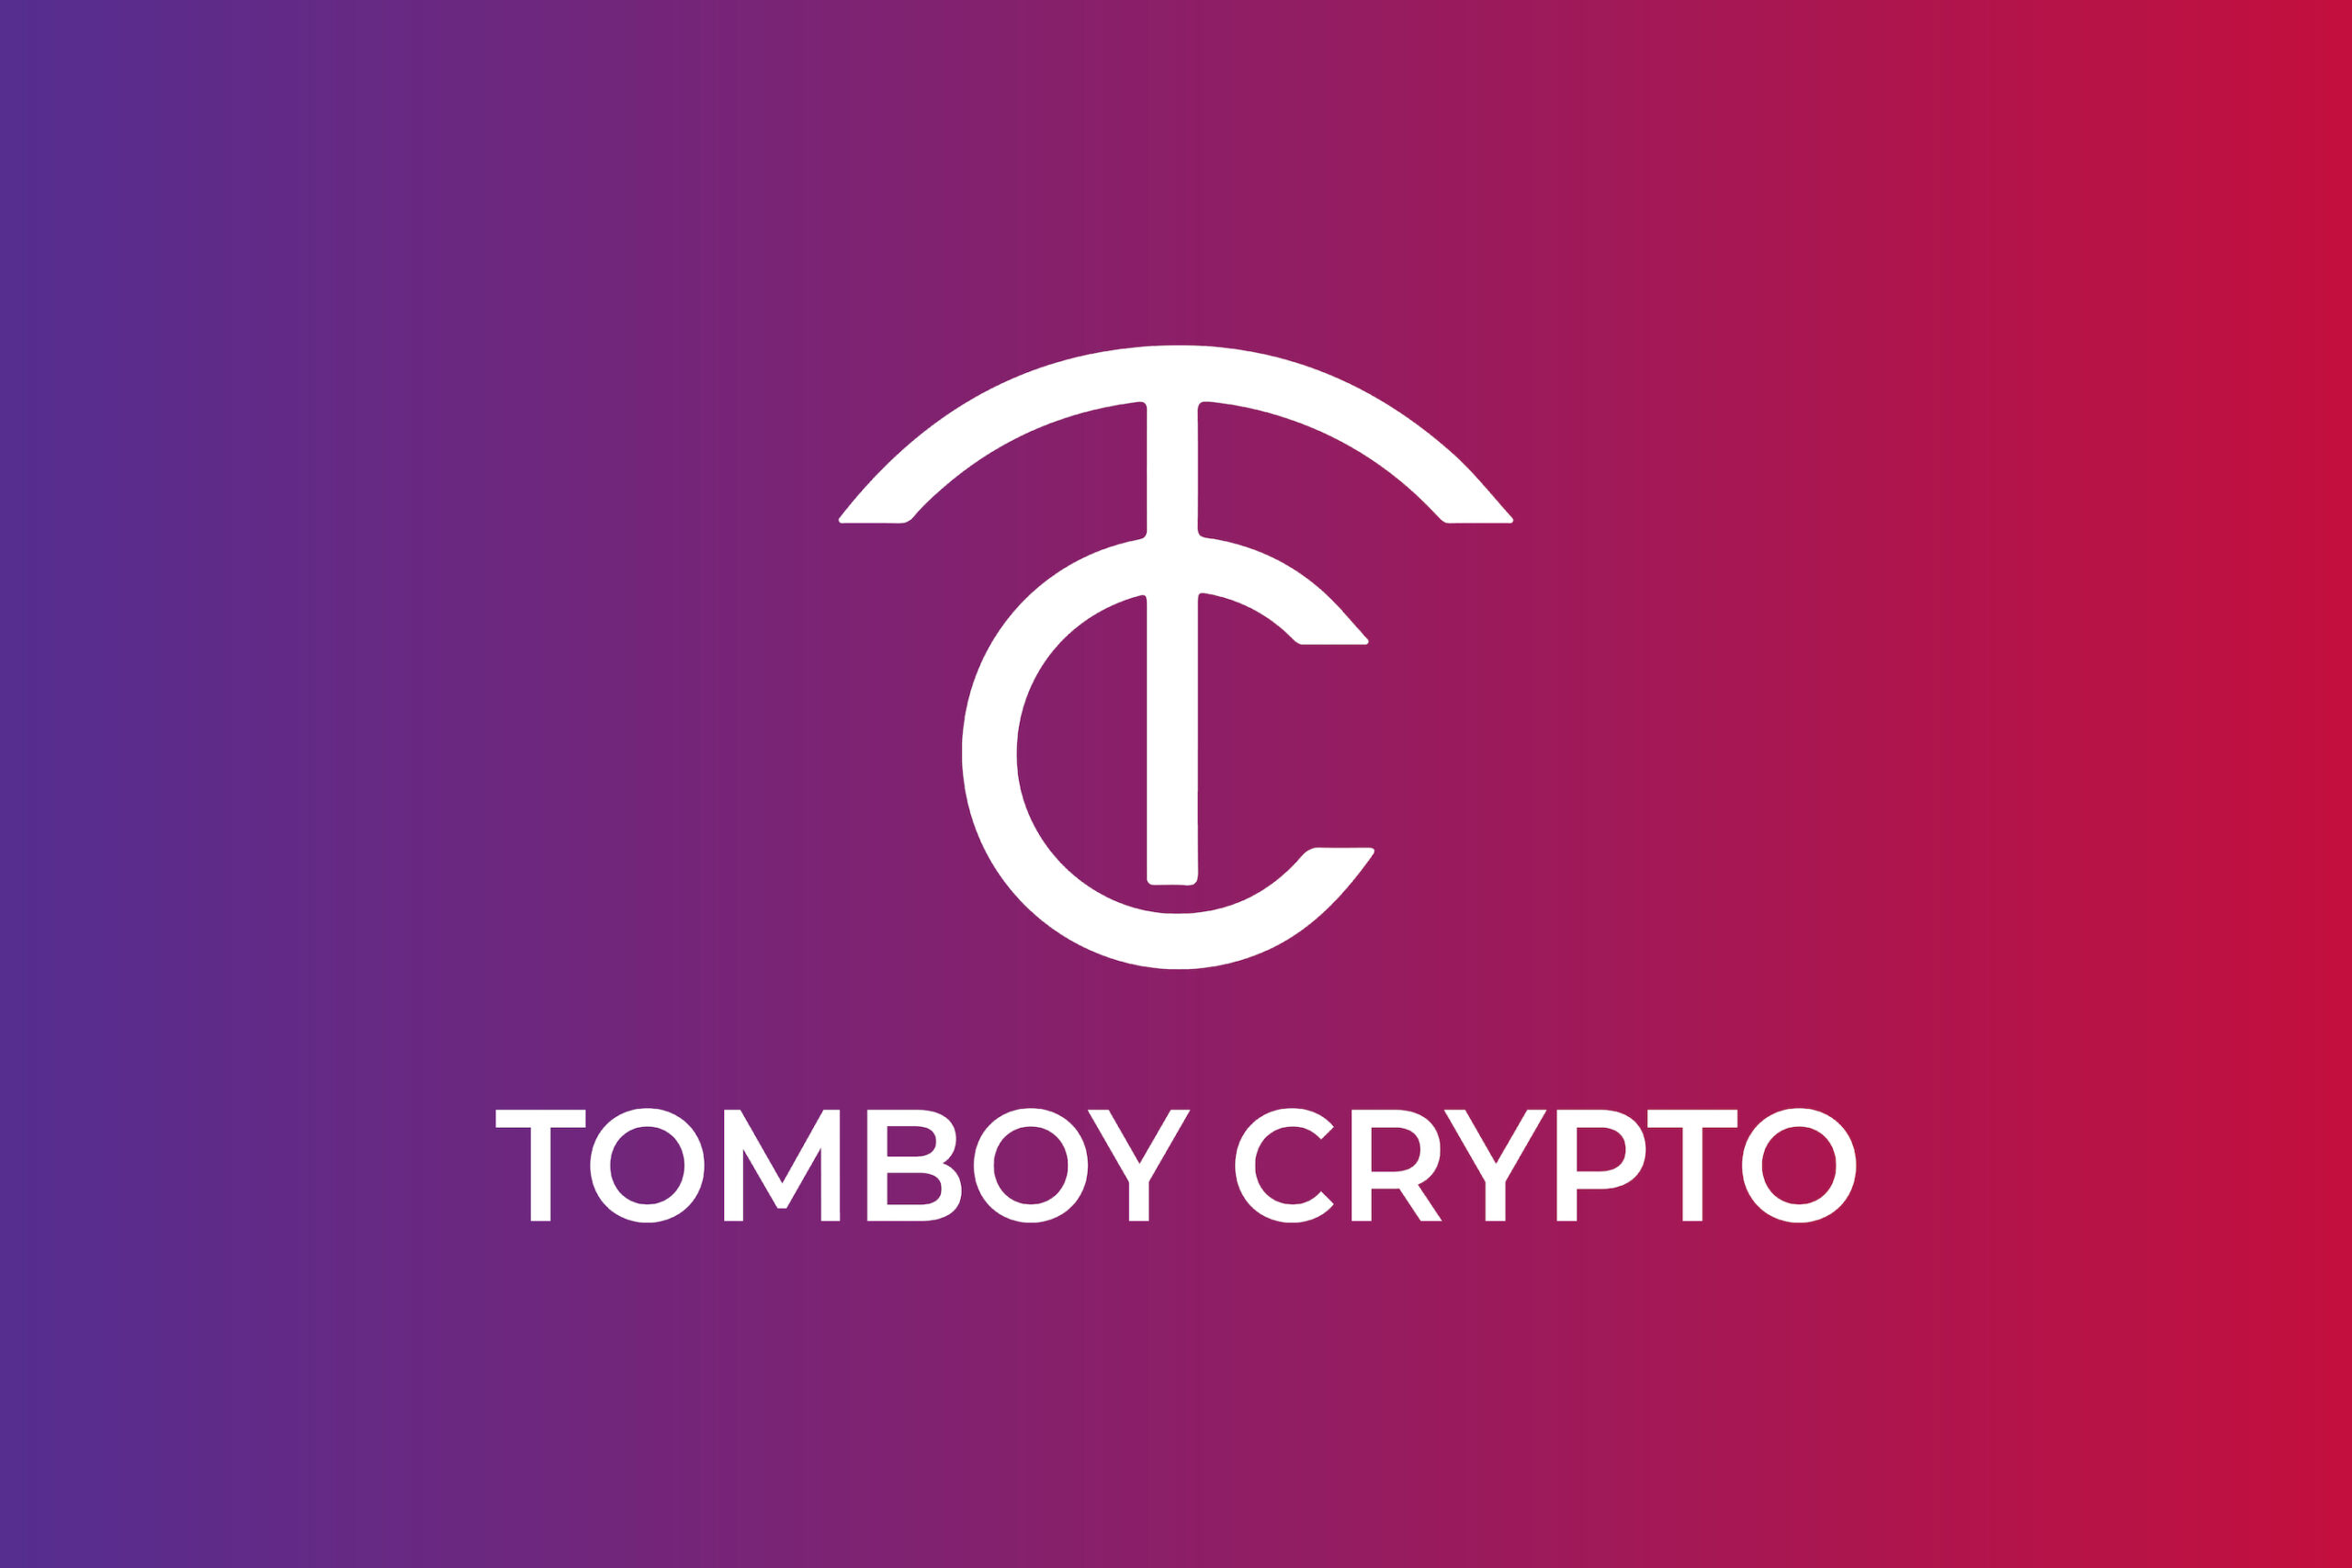 A purple and pink background with the words tomboy crypto in white.